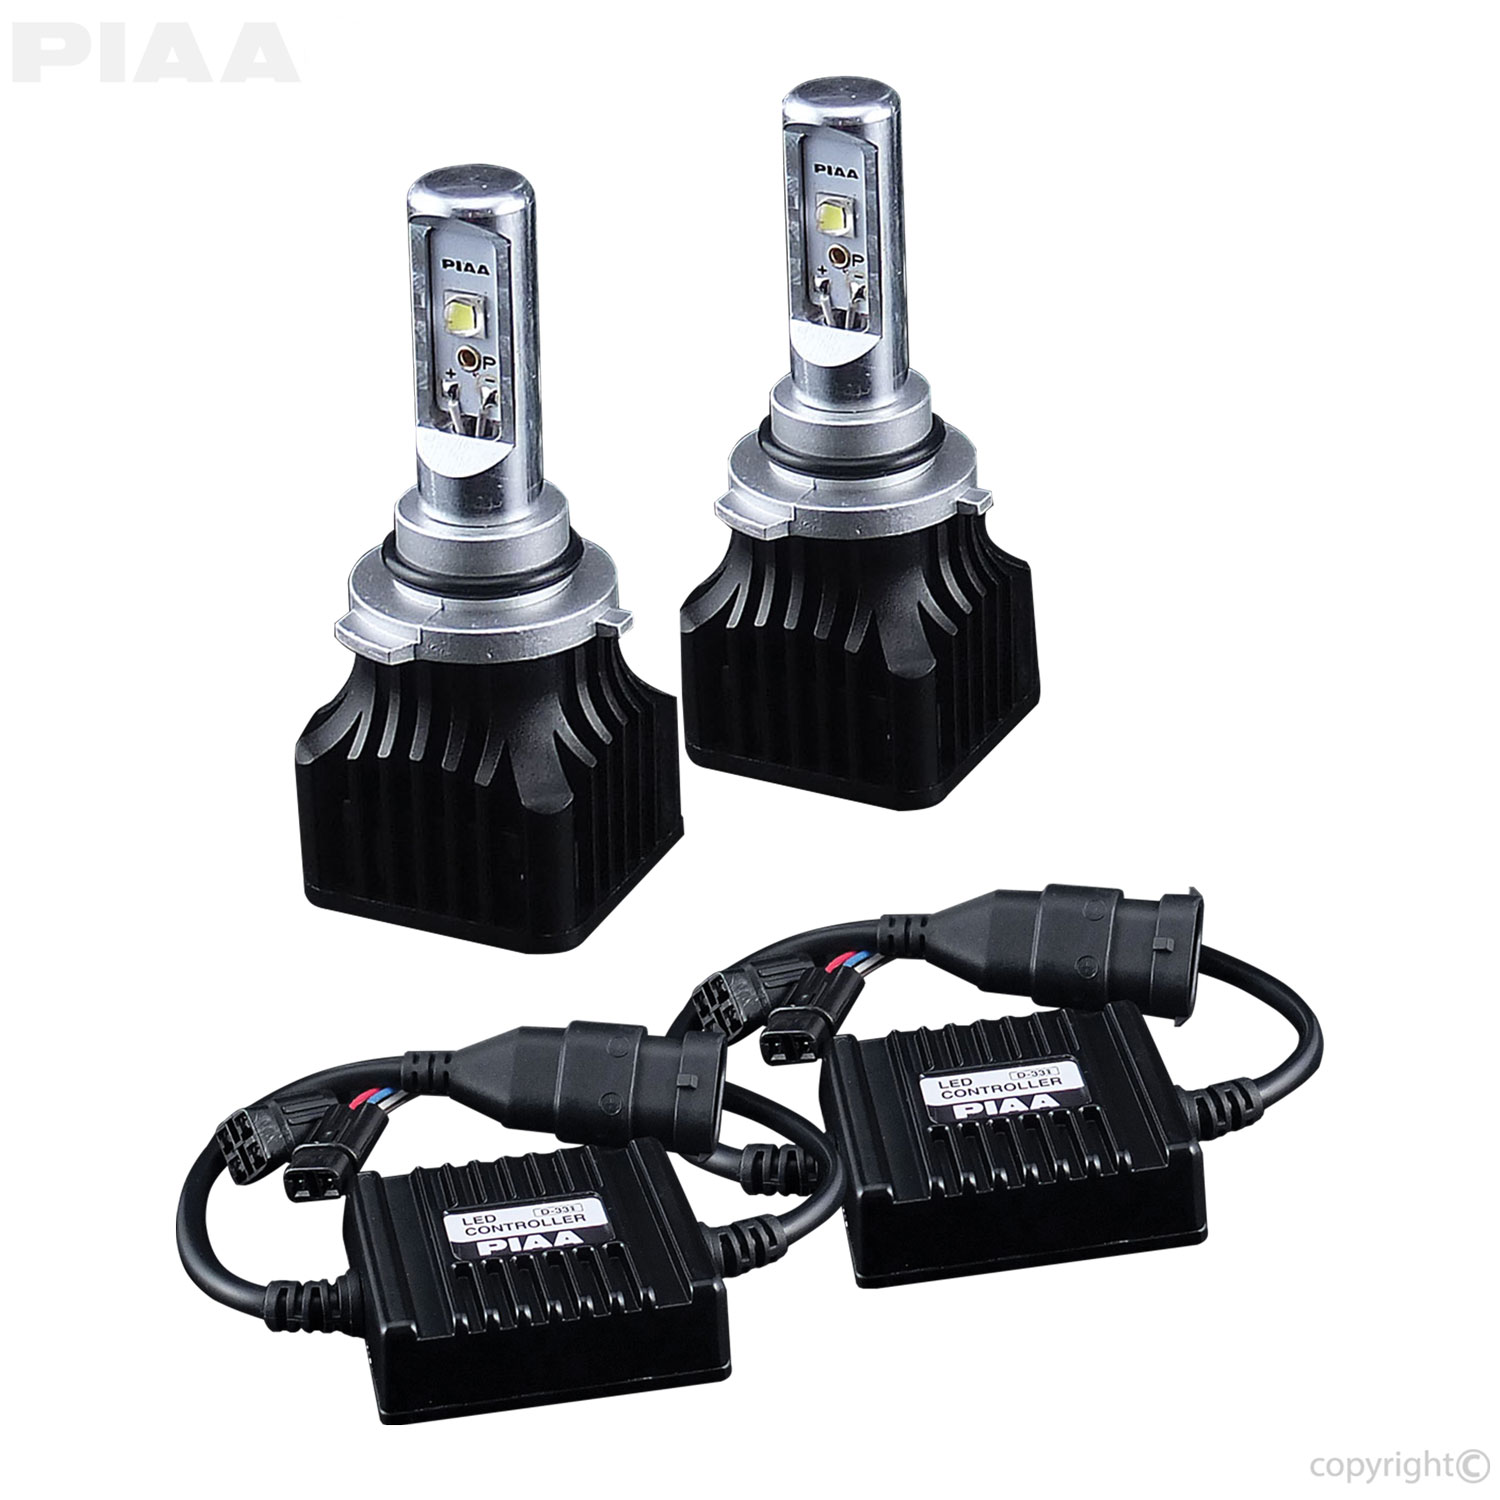 https://www.piaa.com/resize/Shared/product-images/automotive-bulbs/piaa-17201-9006-led-white-contents-hr.jpg?bw=1000&w=1000&bh=1000&h=1000